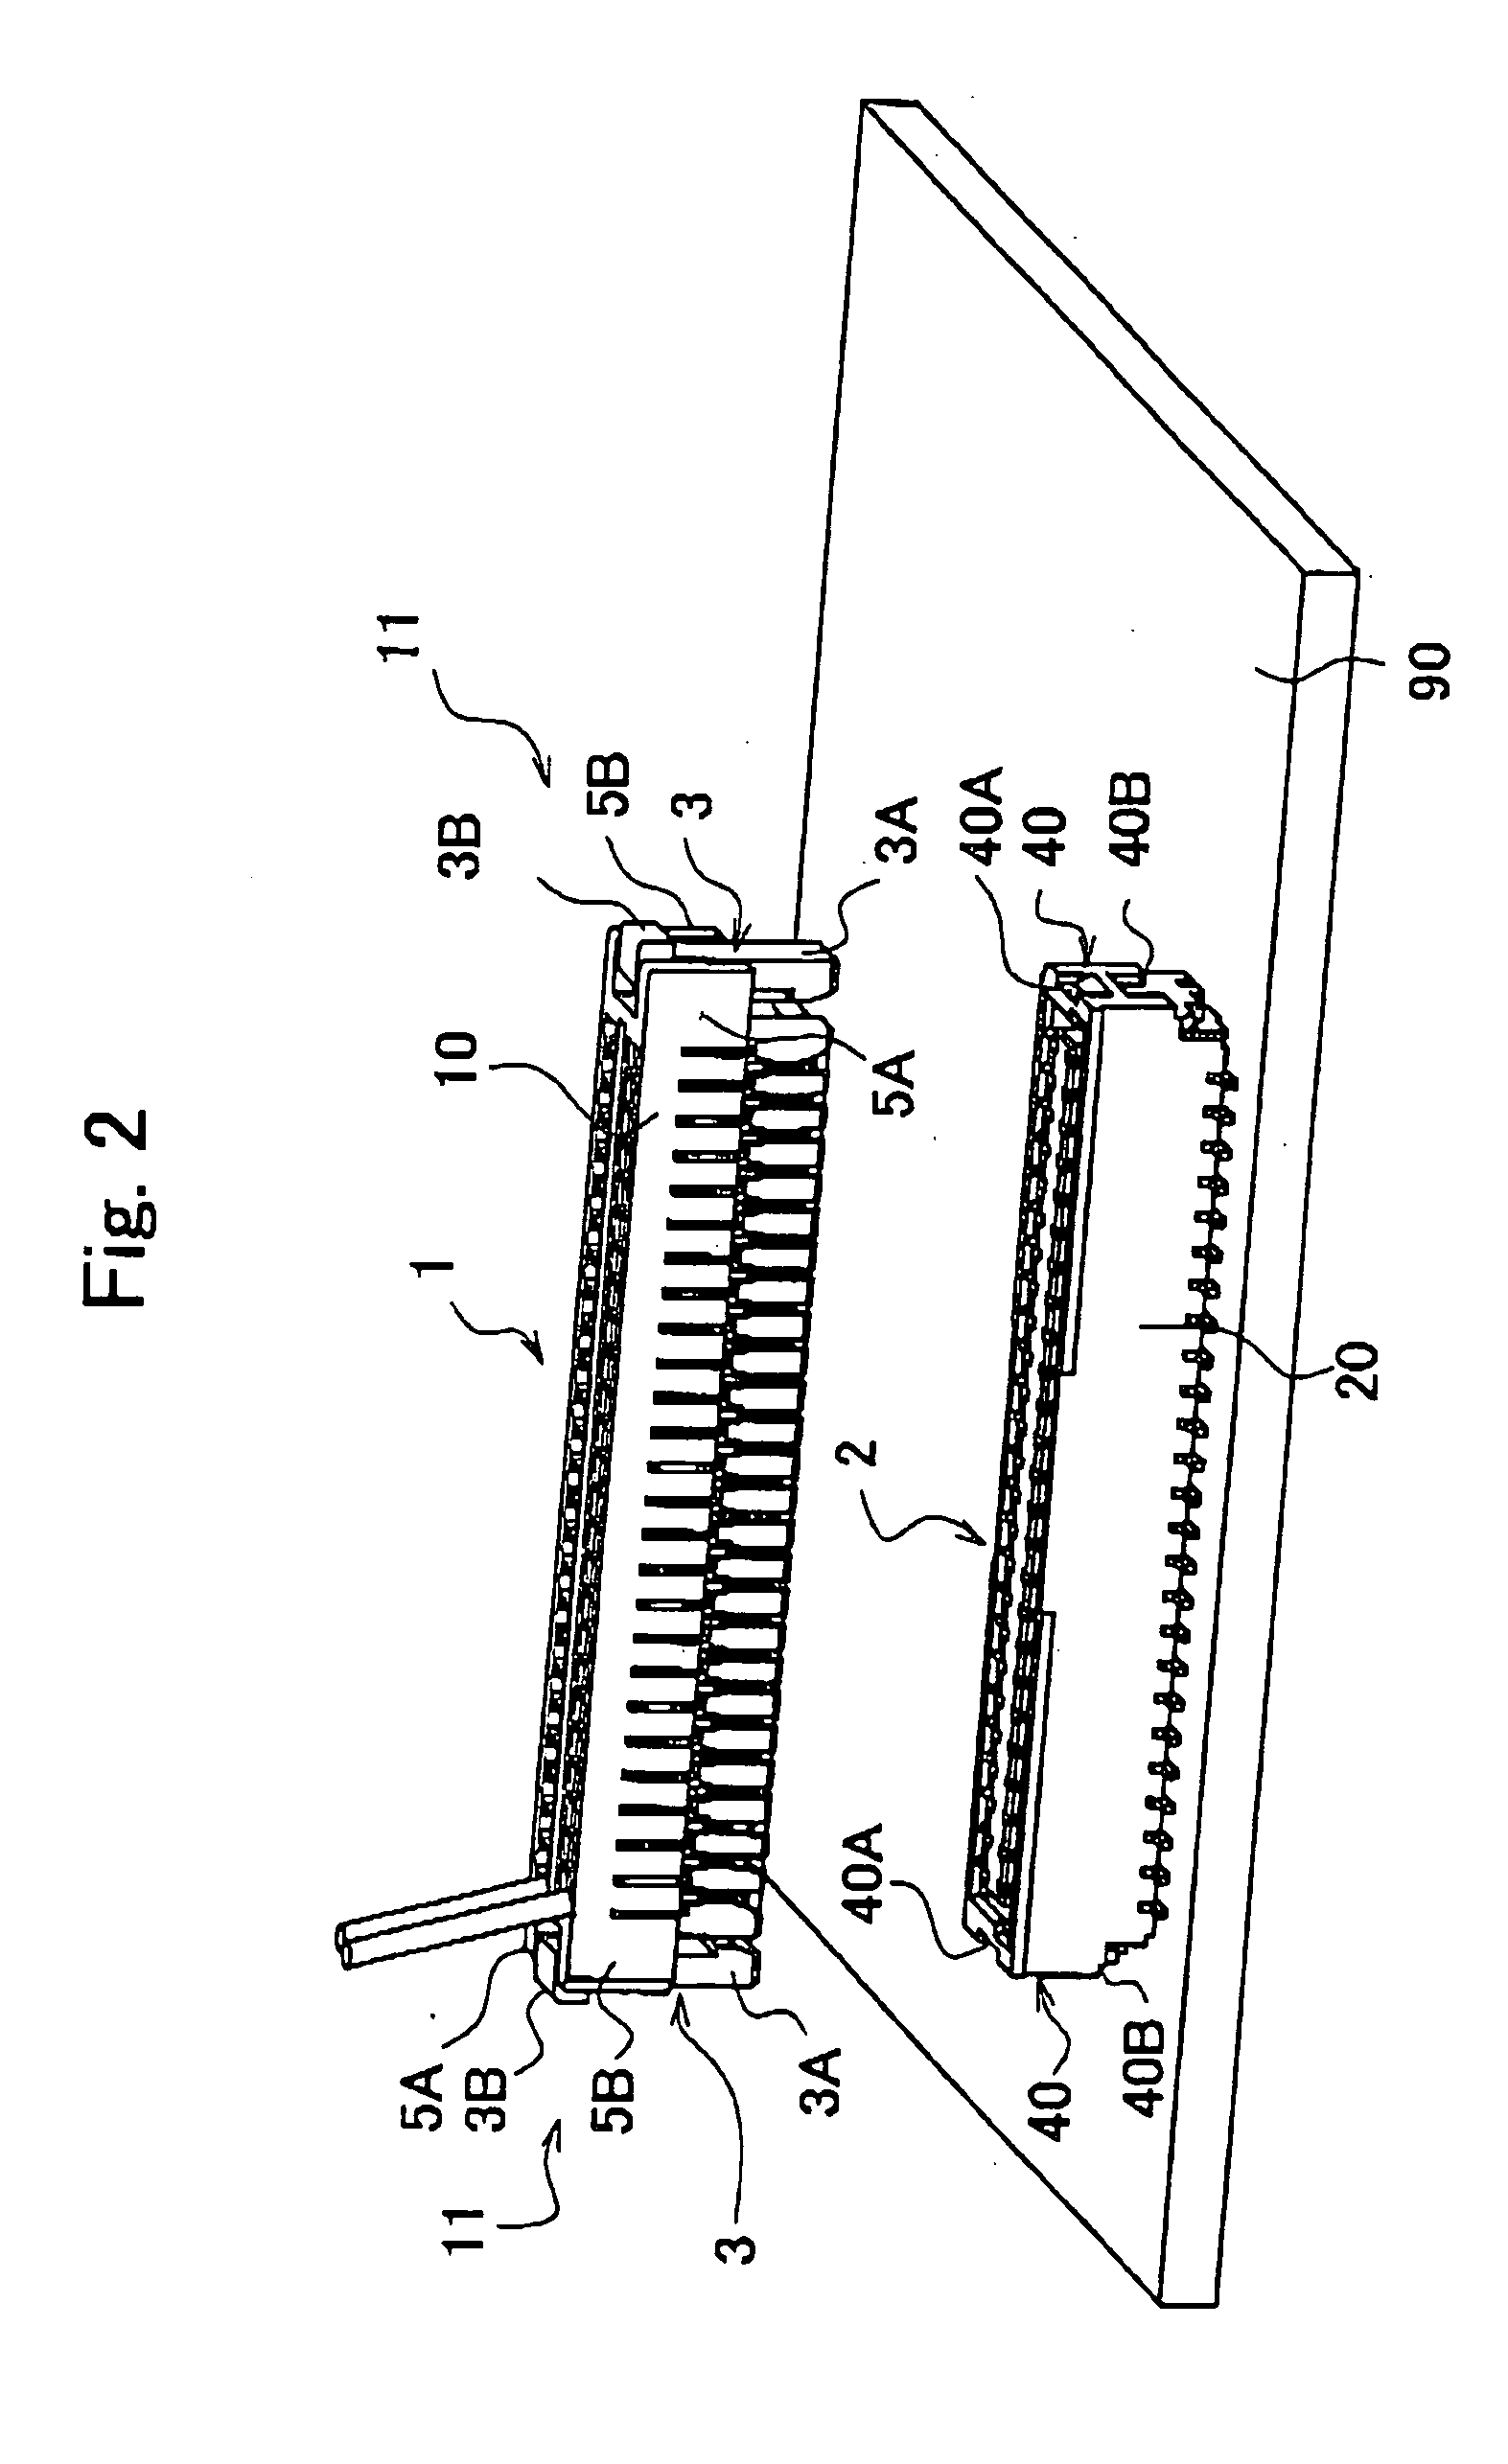 Connector with lock mechanism